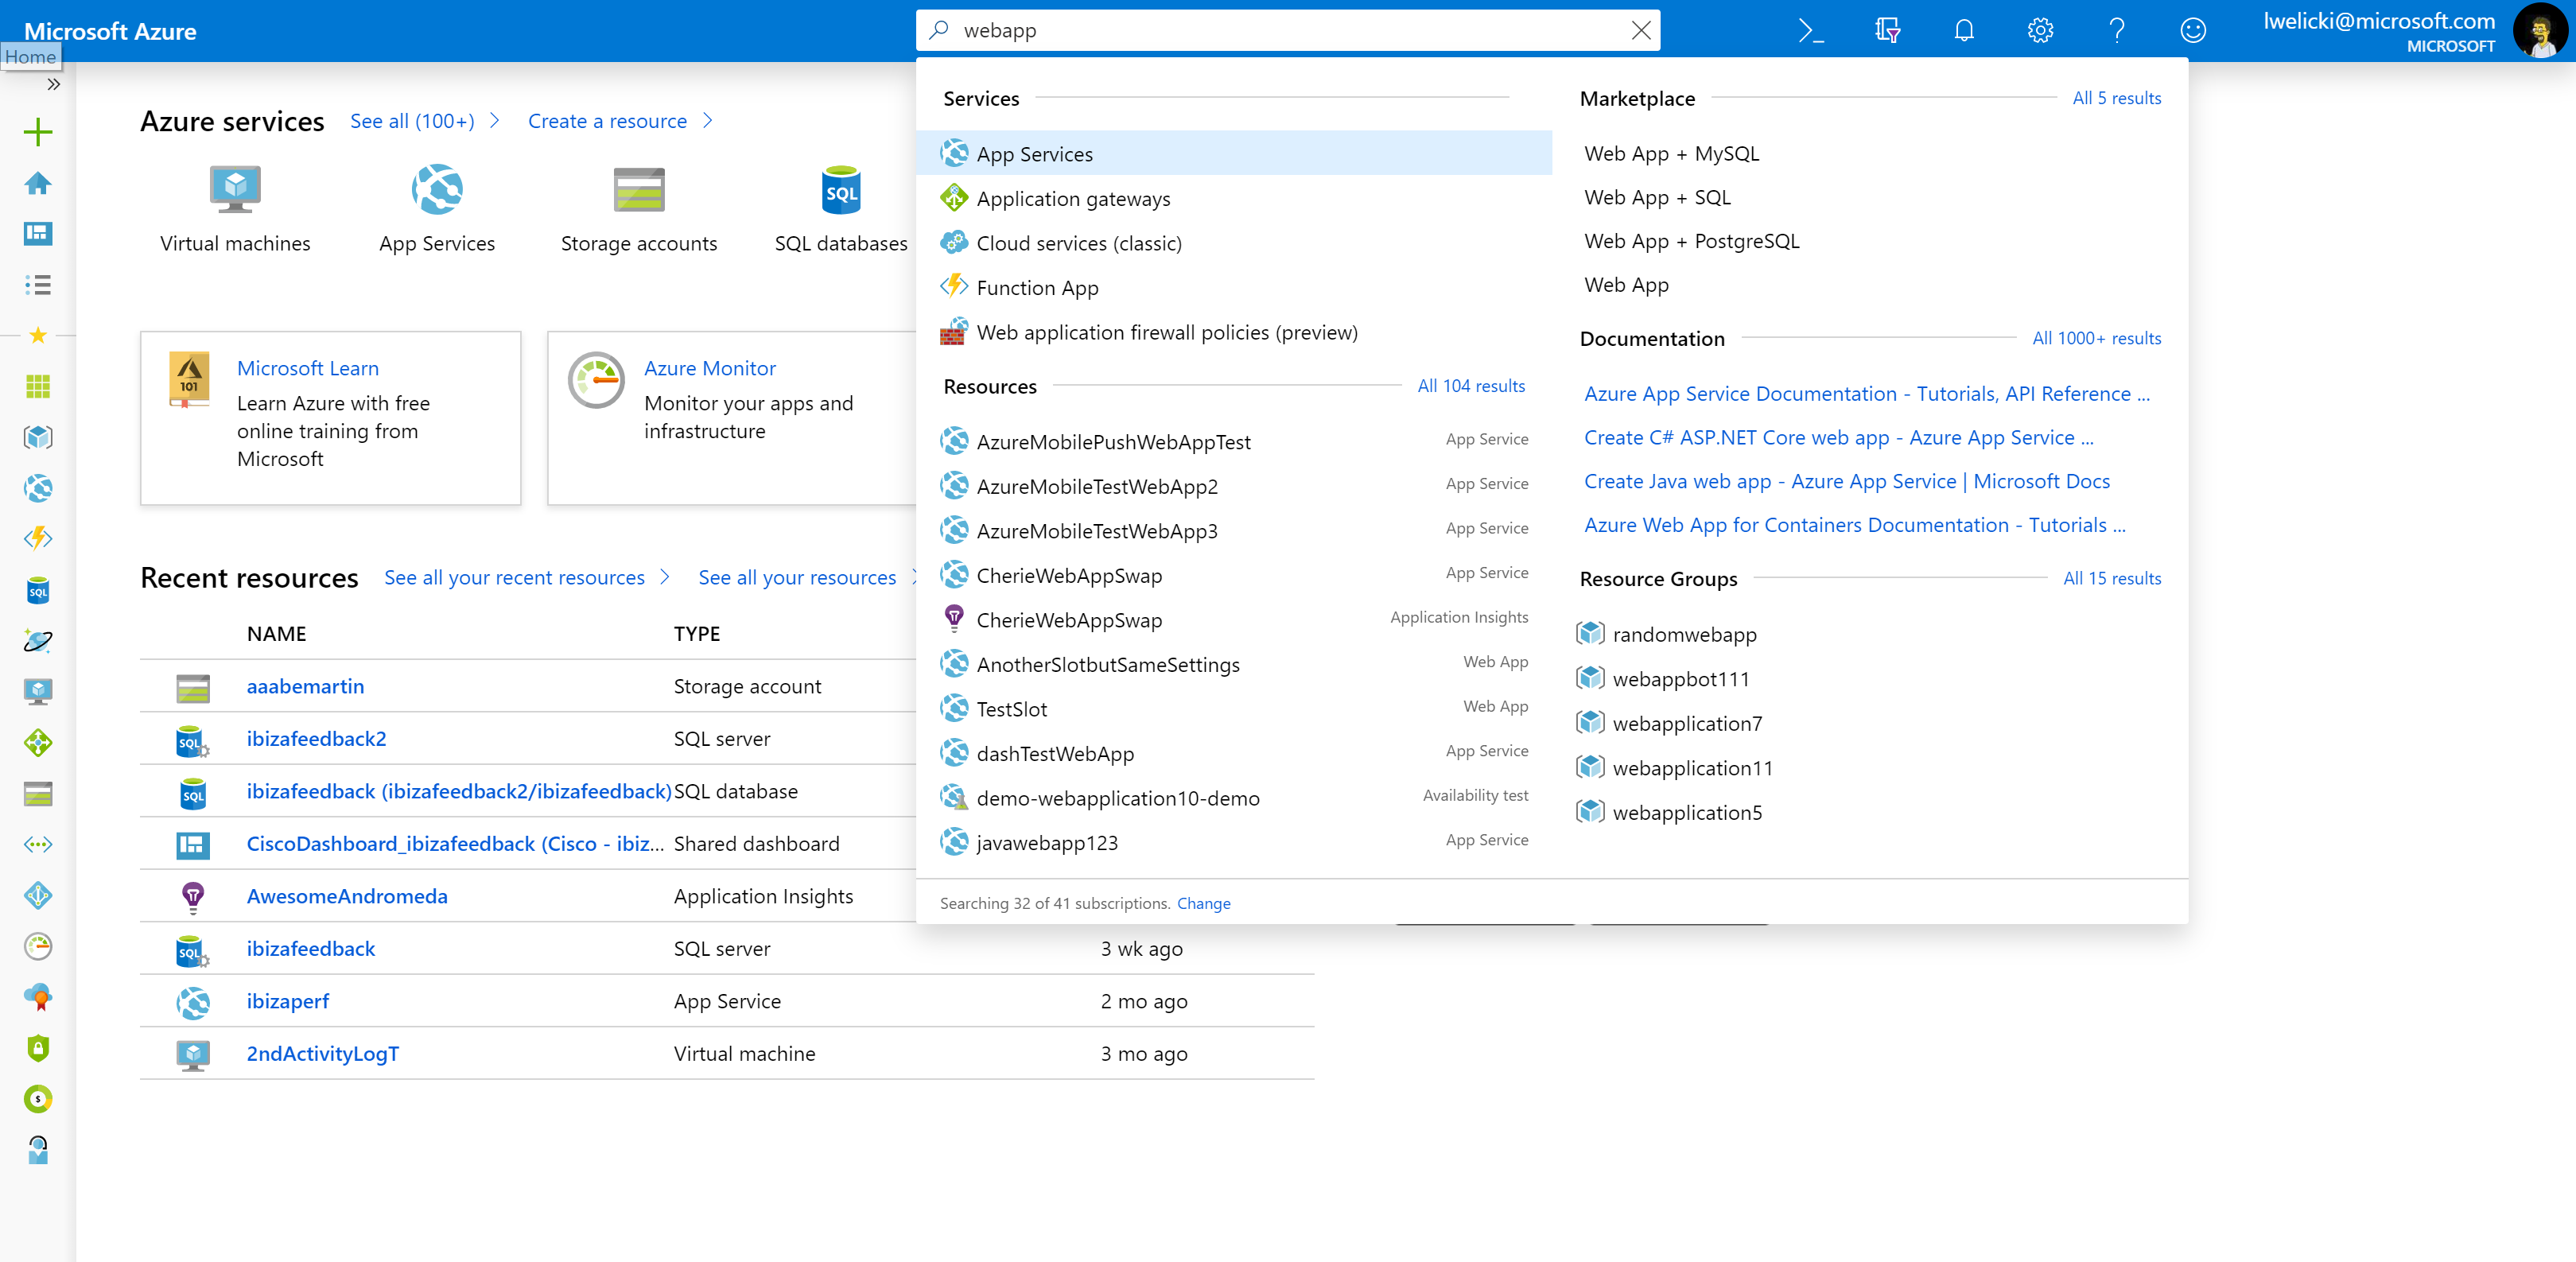 Improvements in global search results in the Azure portal